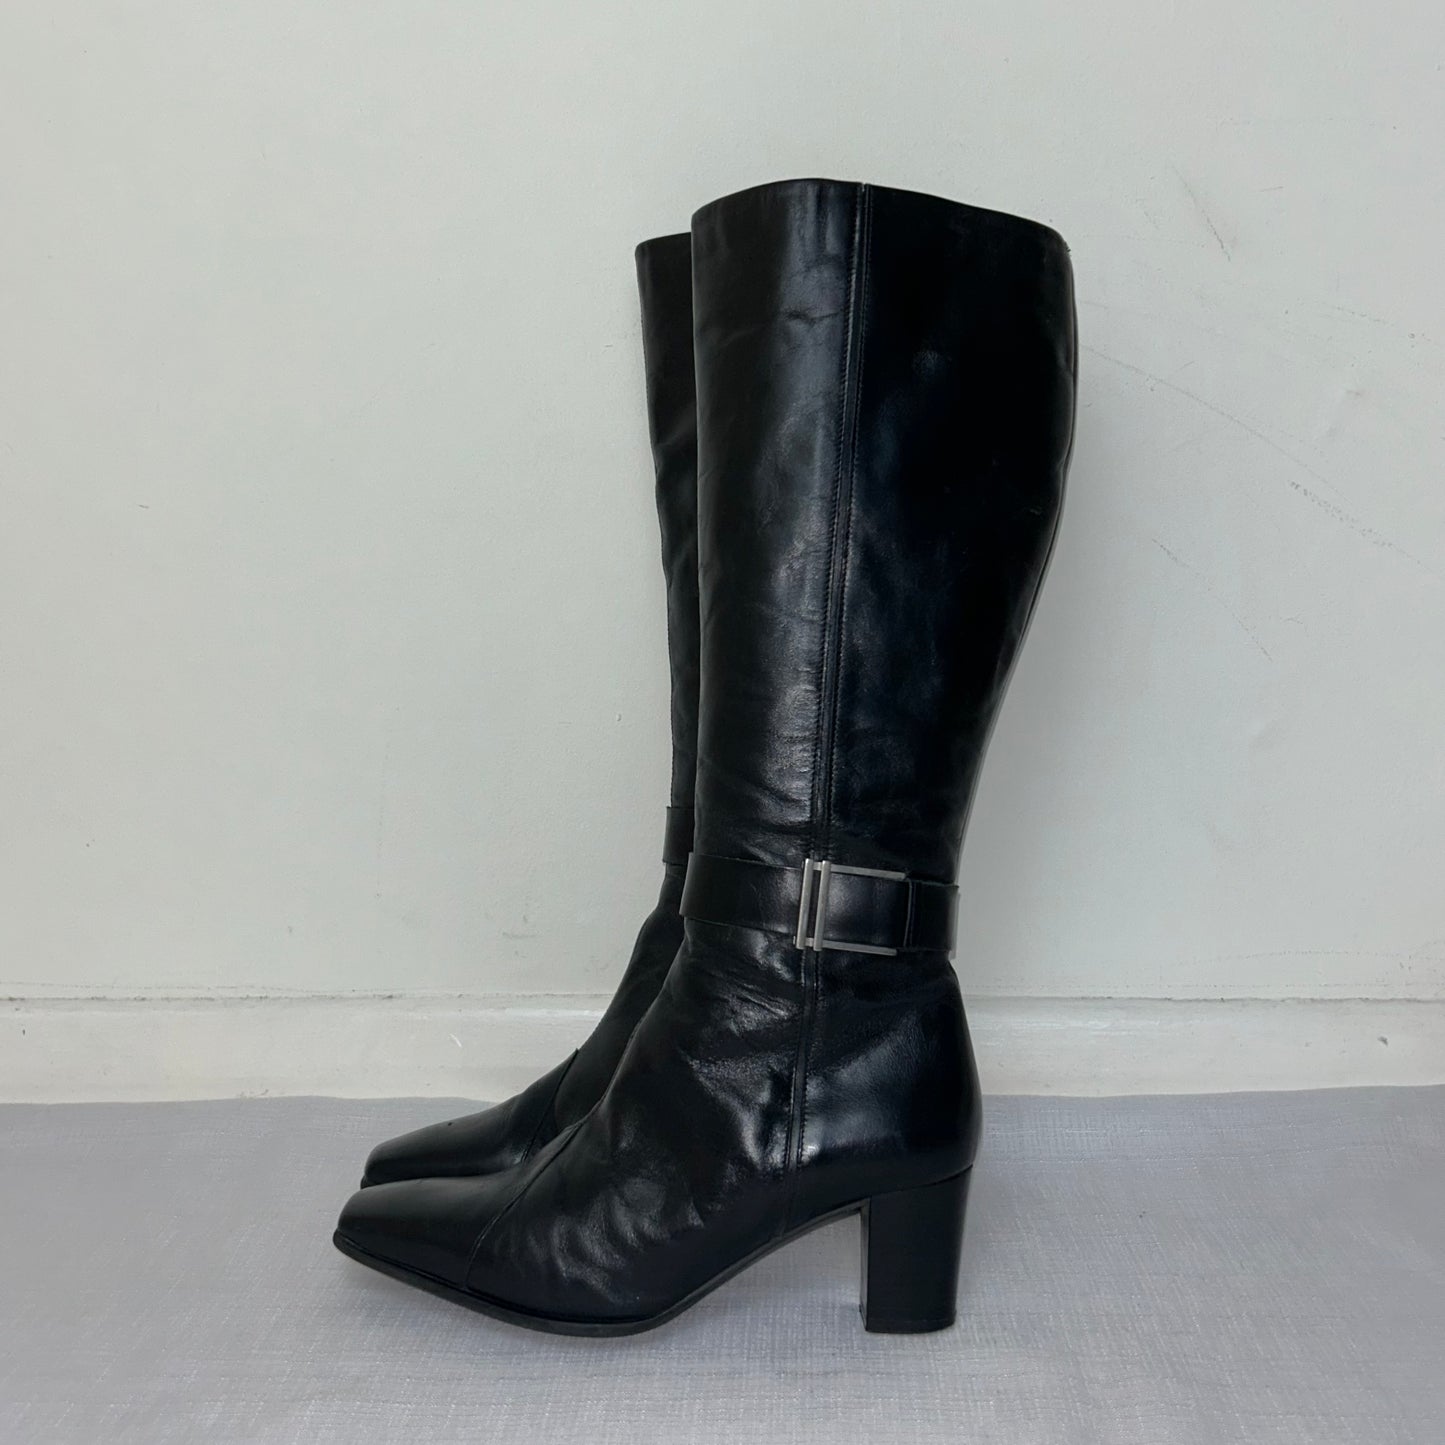 black knee high leather boots with silver buckle shown on a white background